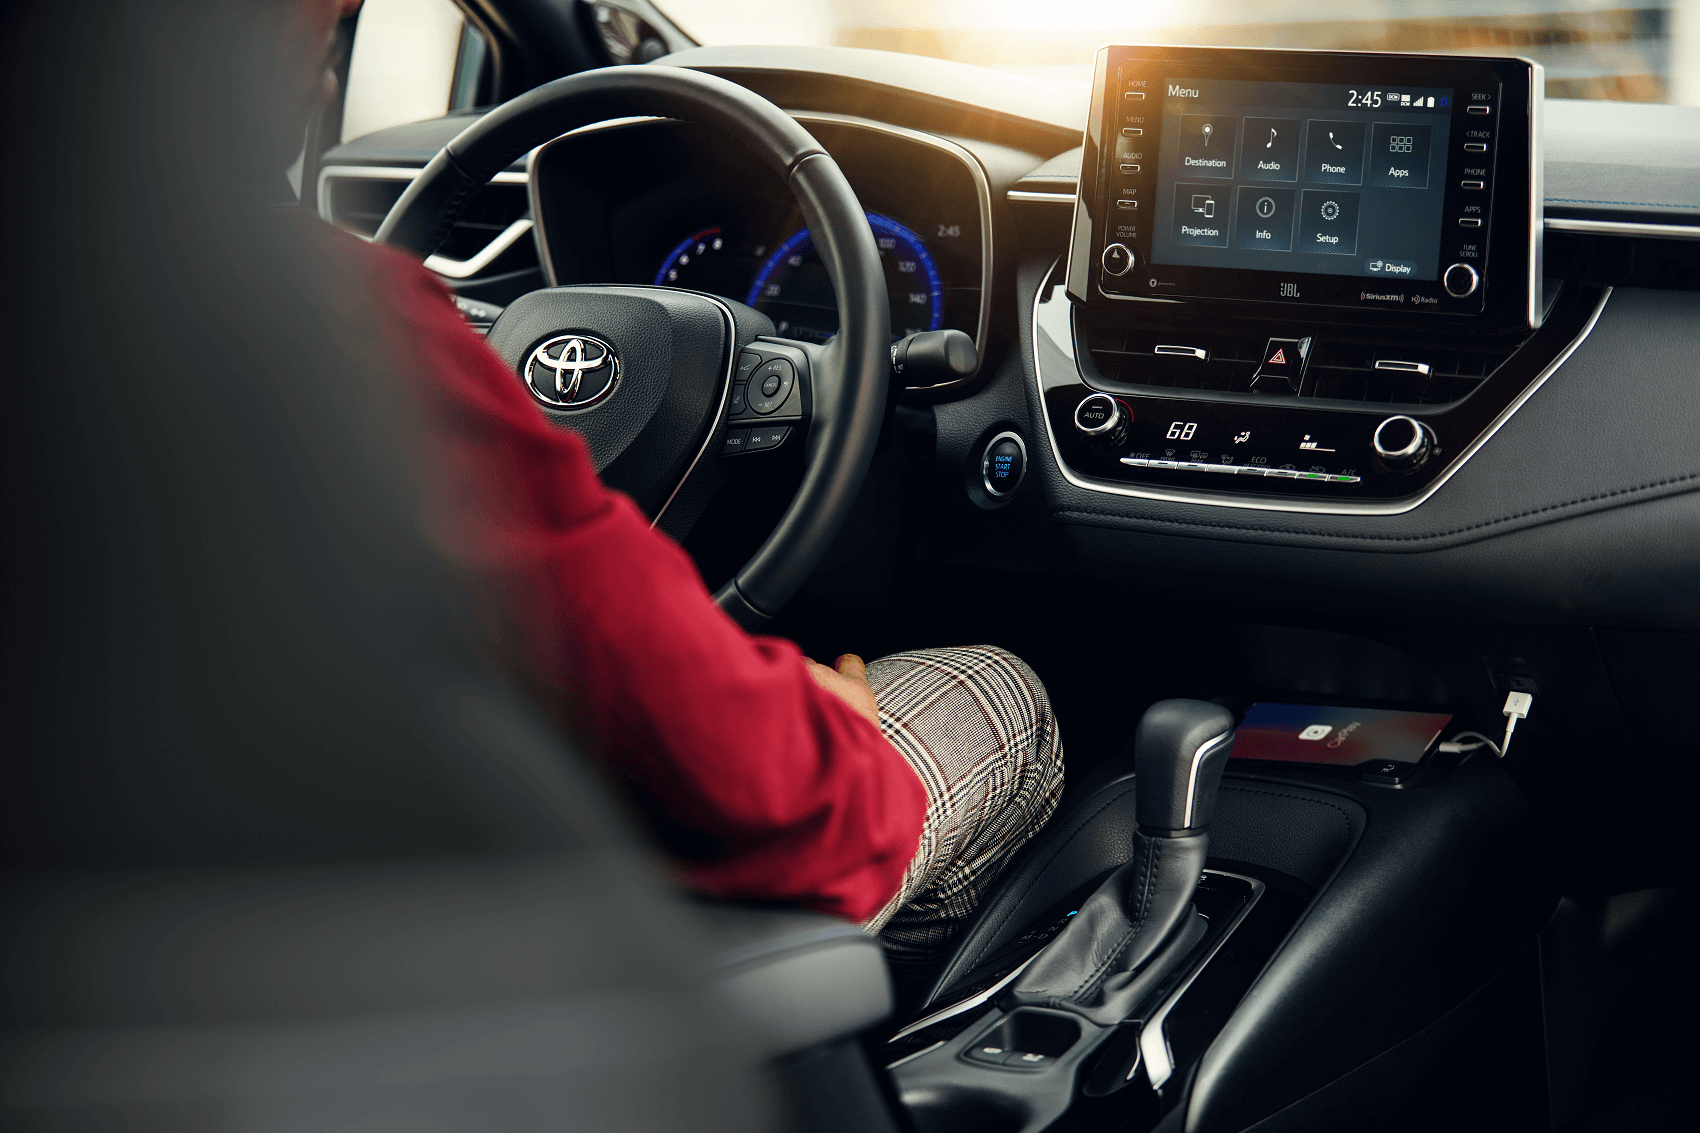 2021 Toyota Corolla Trim Levels Review | Toyota of Bowling Green KY